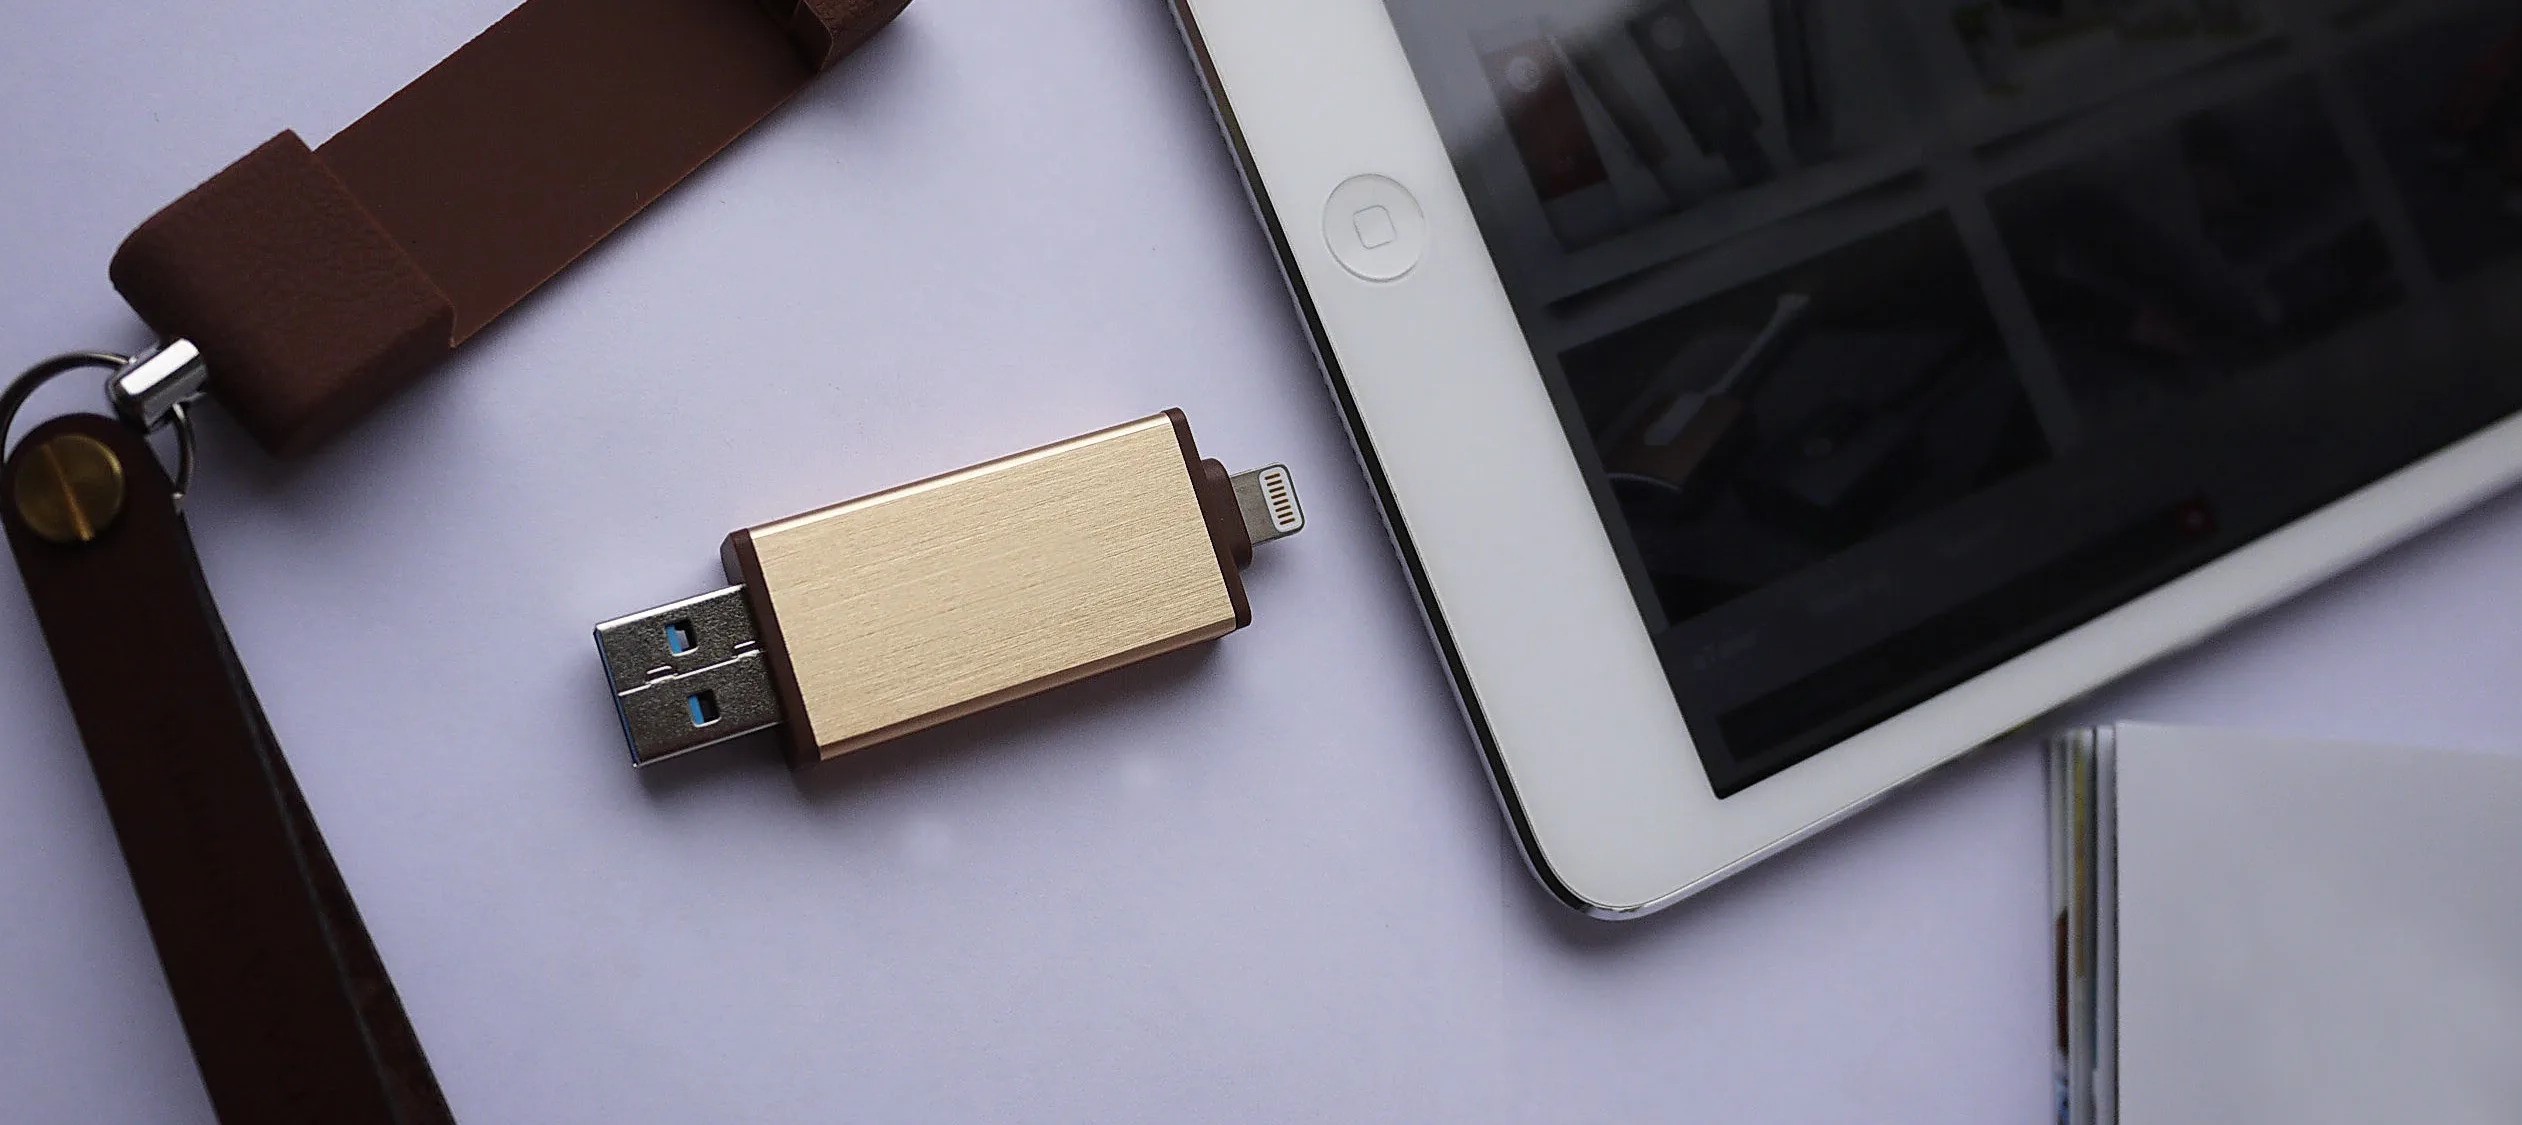 how-to-connect-portable-usb-devices-to-ipads-iphones